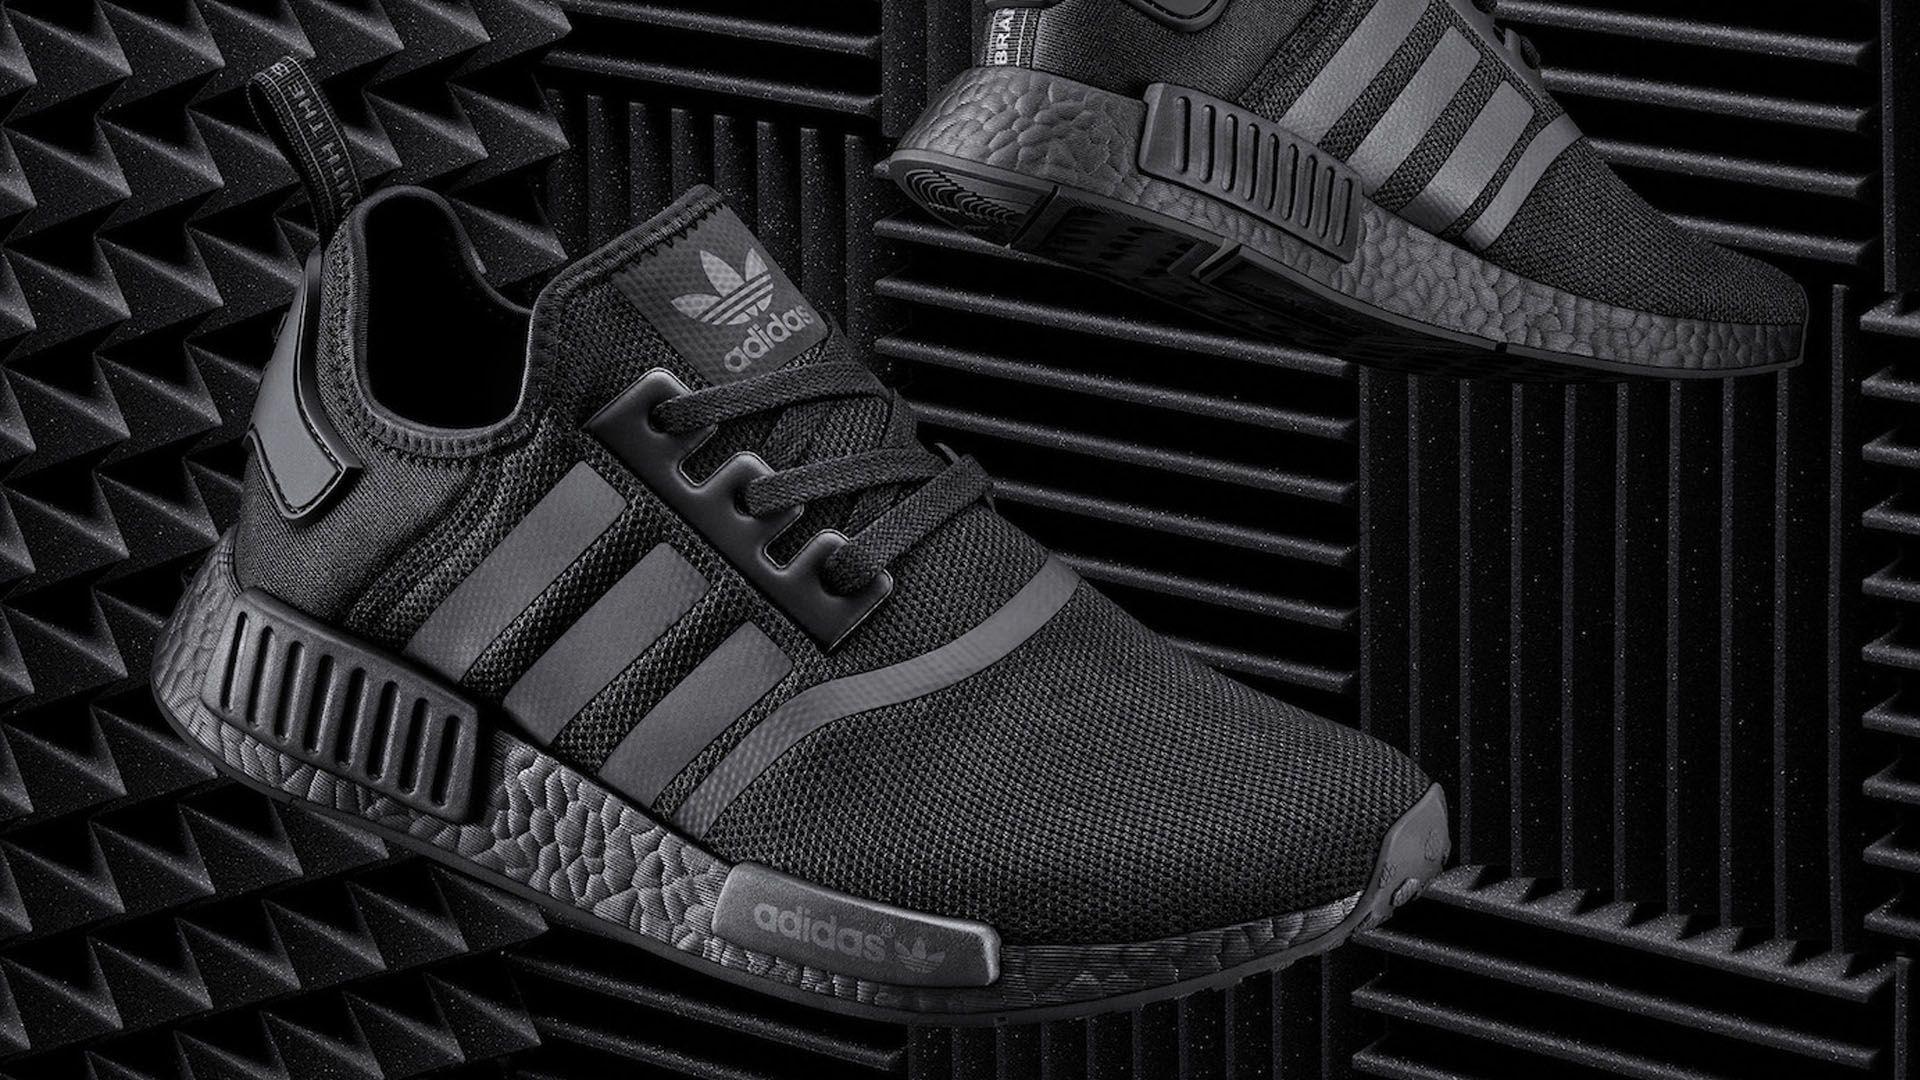 ADIDAS ORIGINALS NMD COLOUR BOOST IS SET TO BE RELEASED THIS